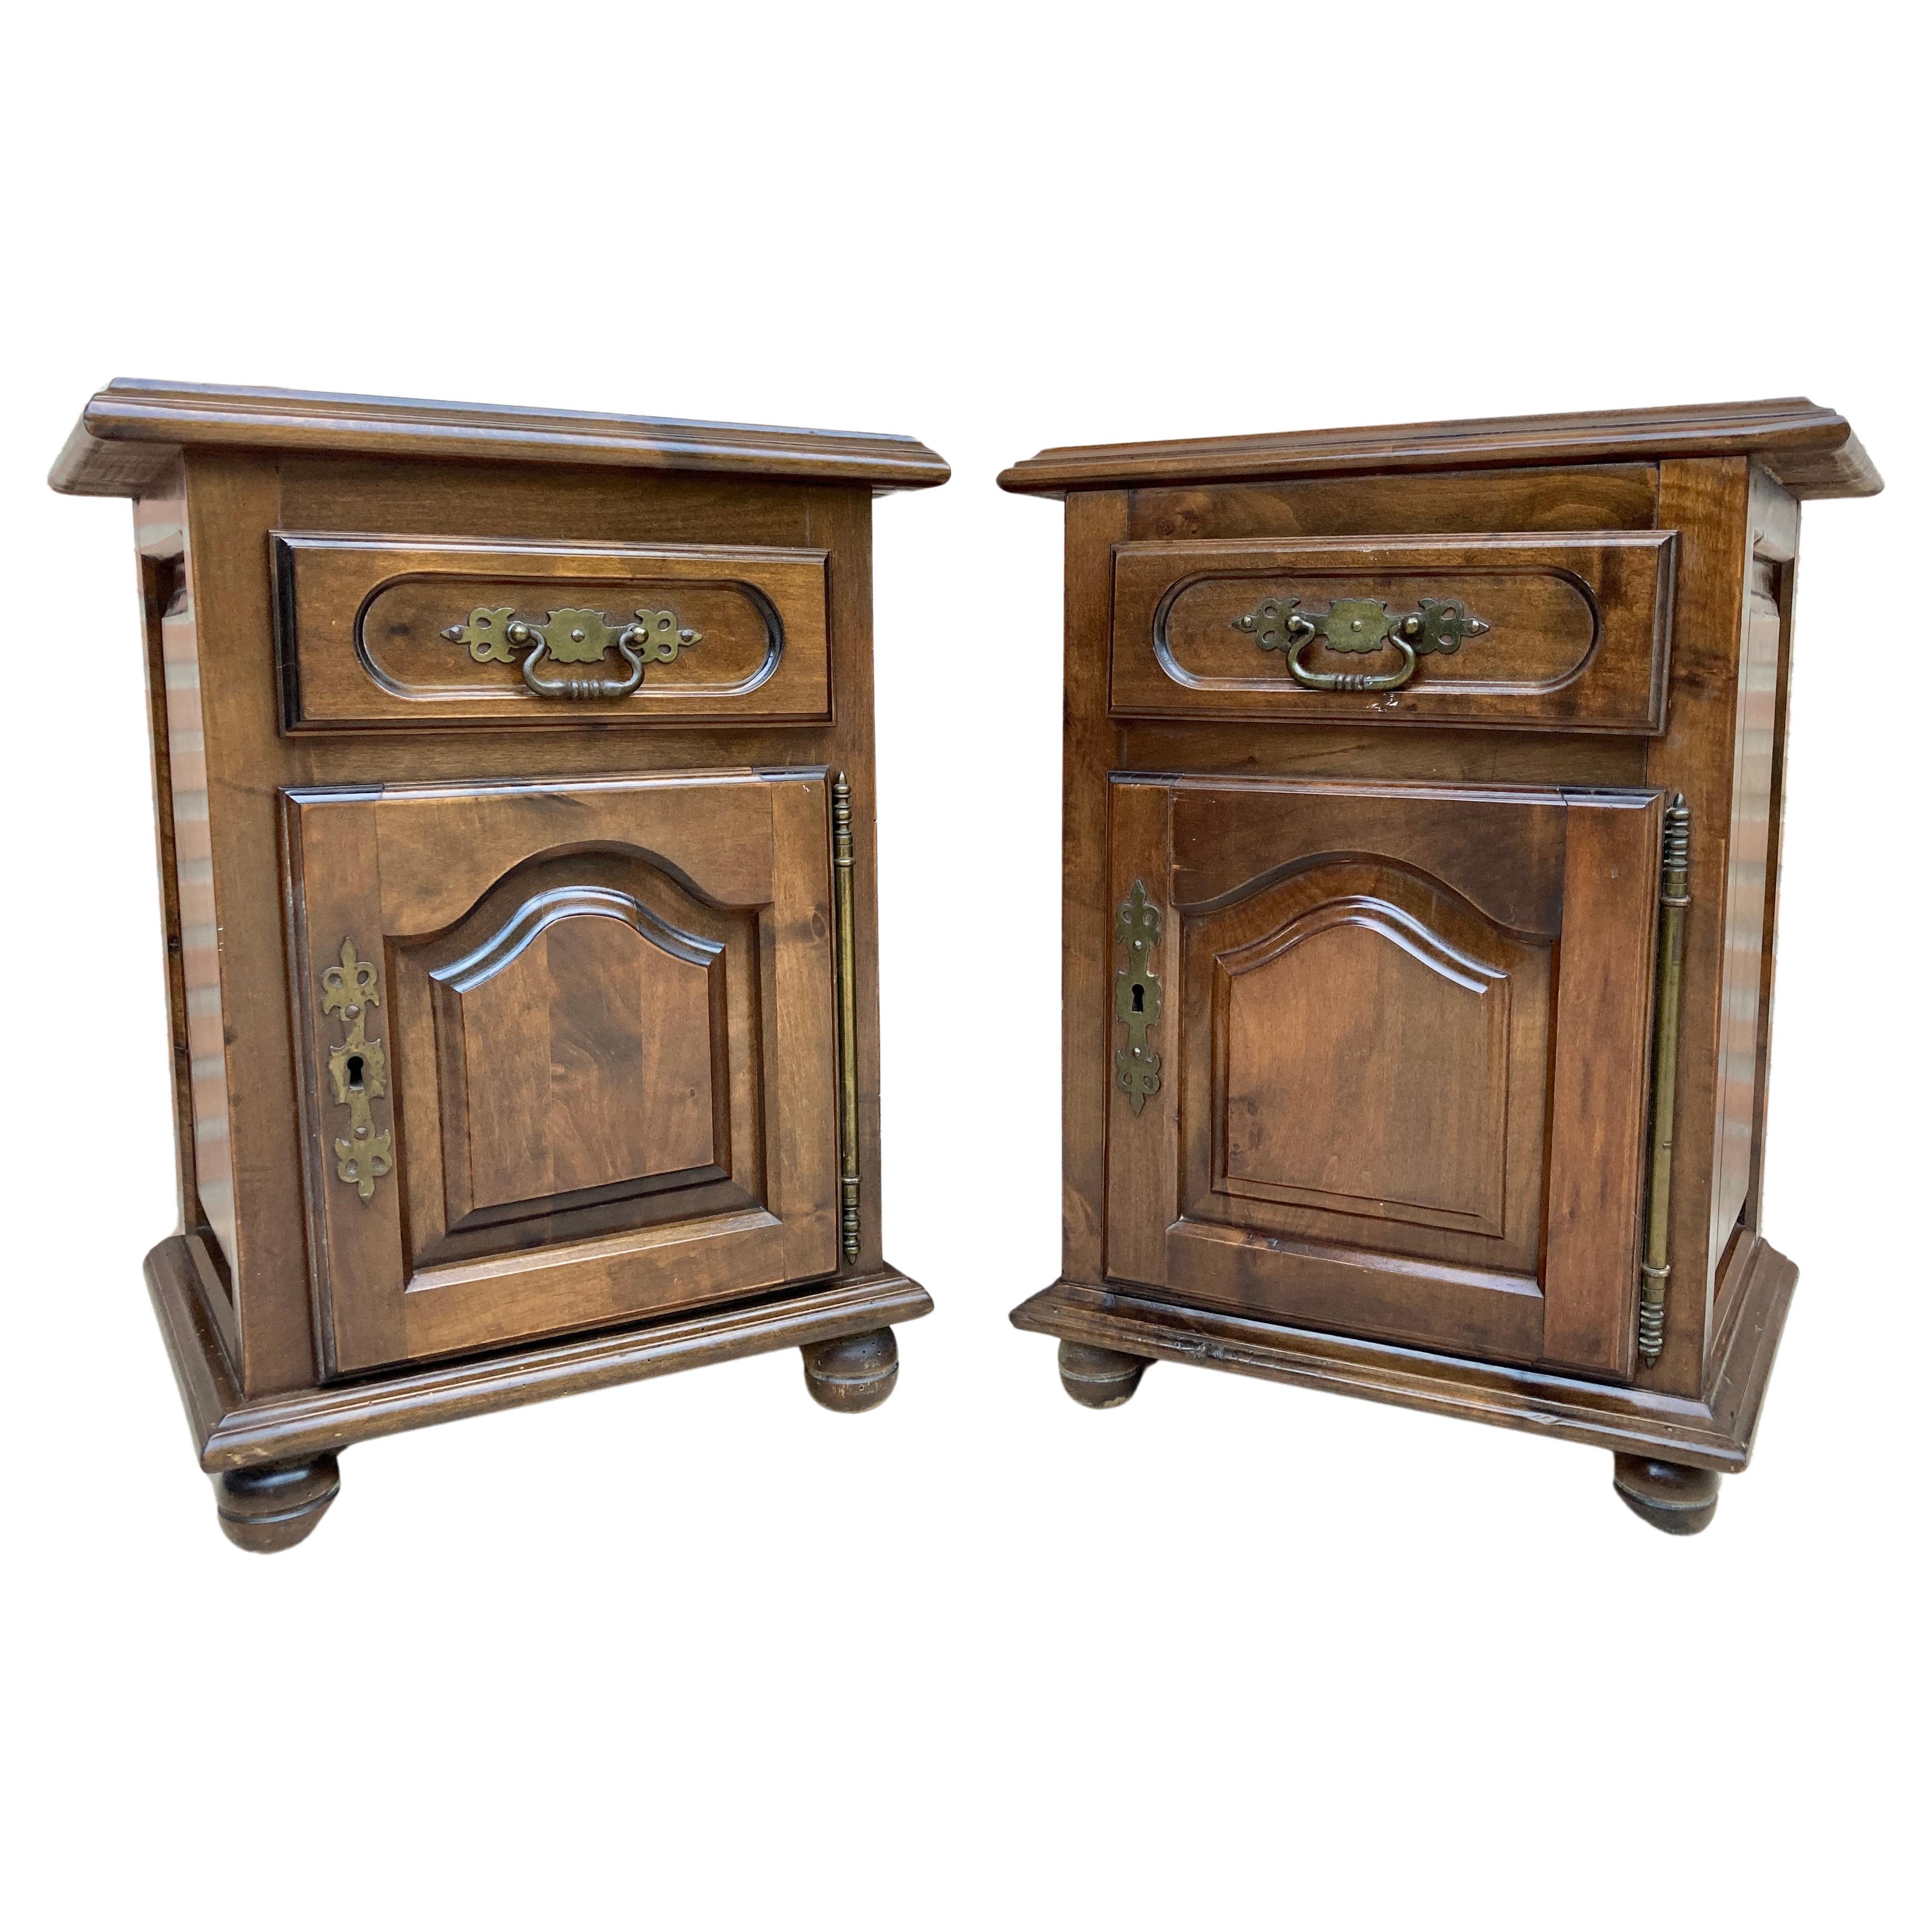 20th Spanish Nightstands with Drawer & Bronze Details, 1920, Set of 2